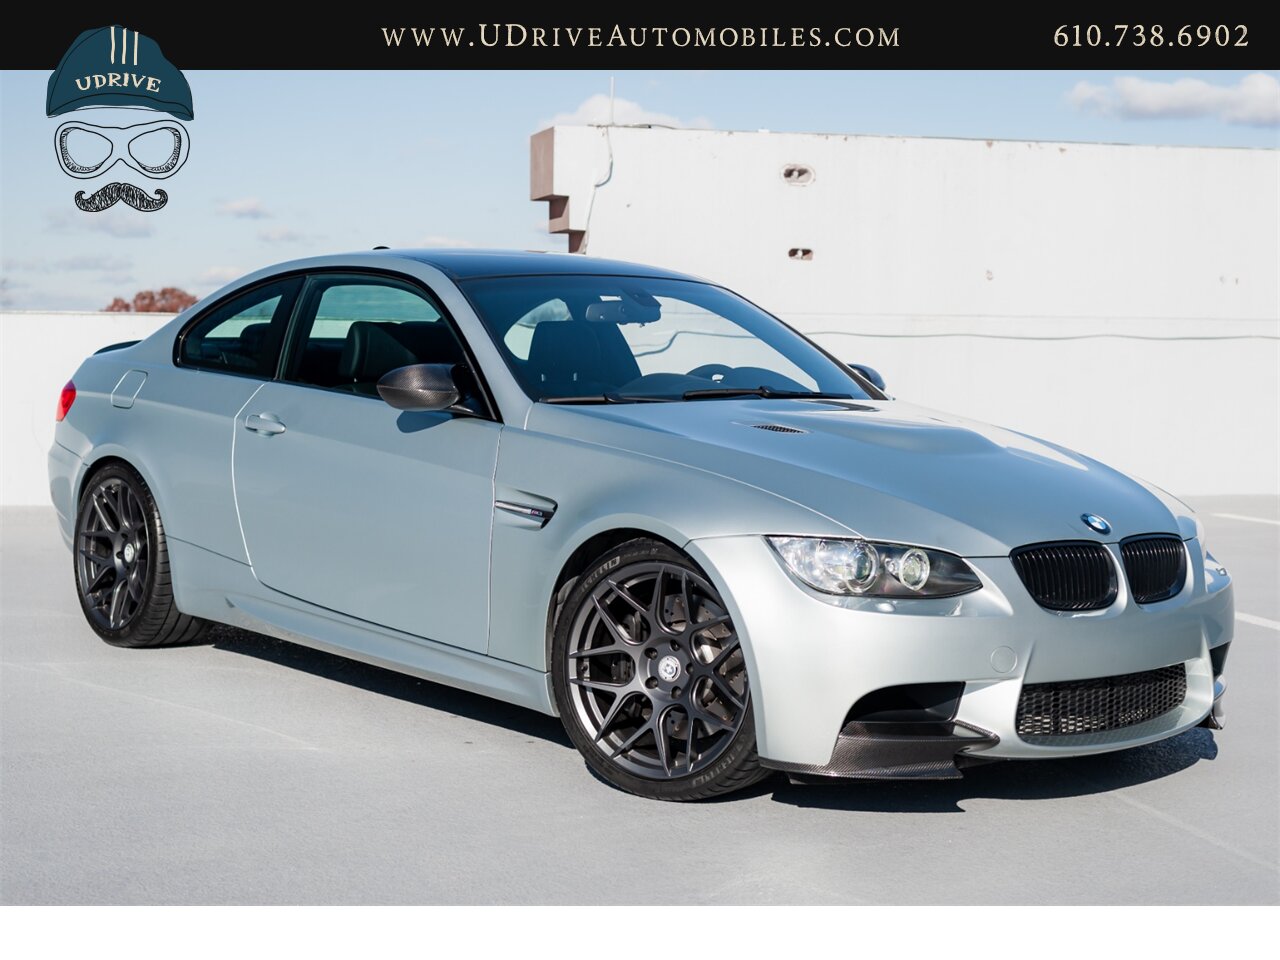 2008 BMW M3 Dinan S3-R M3 1 of 36 Produced DCT 1 Owner Full